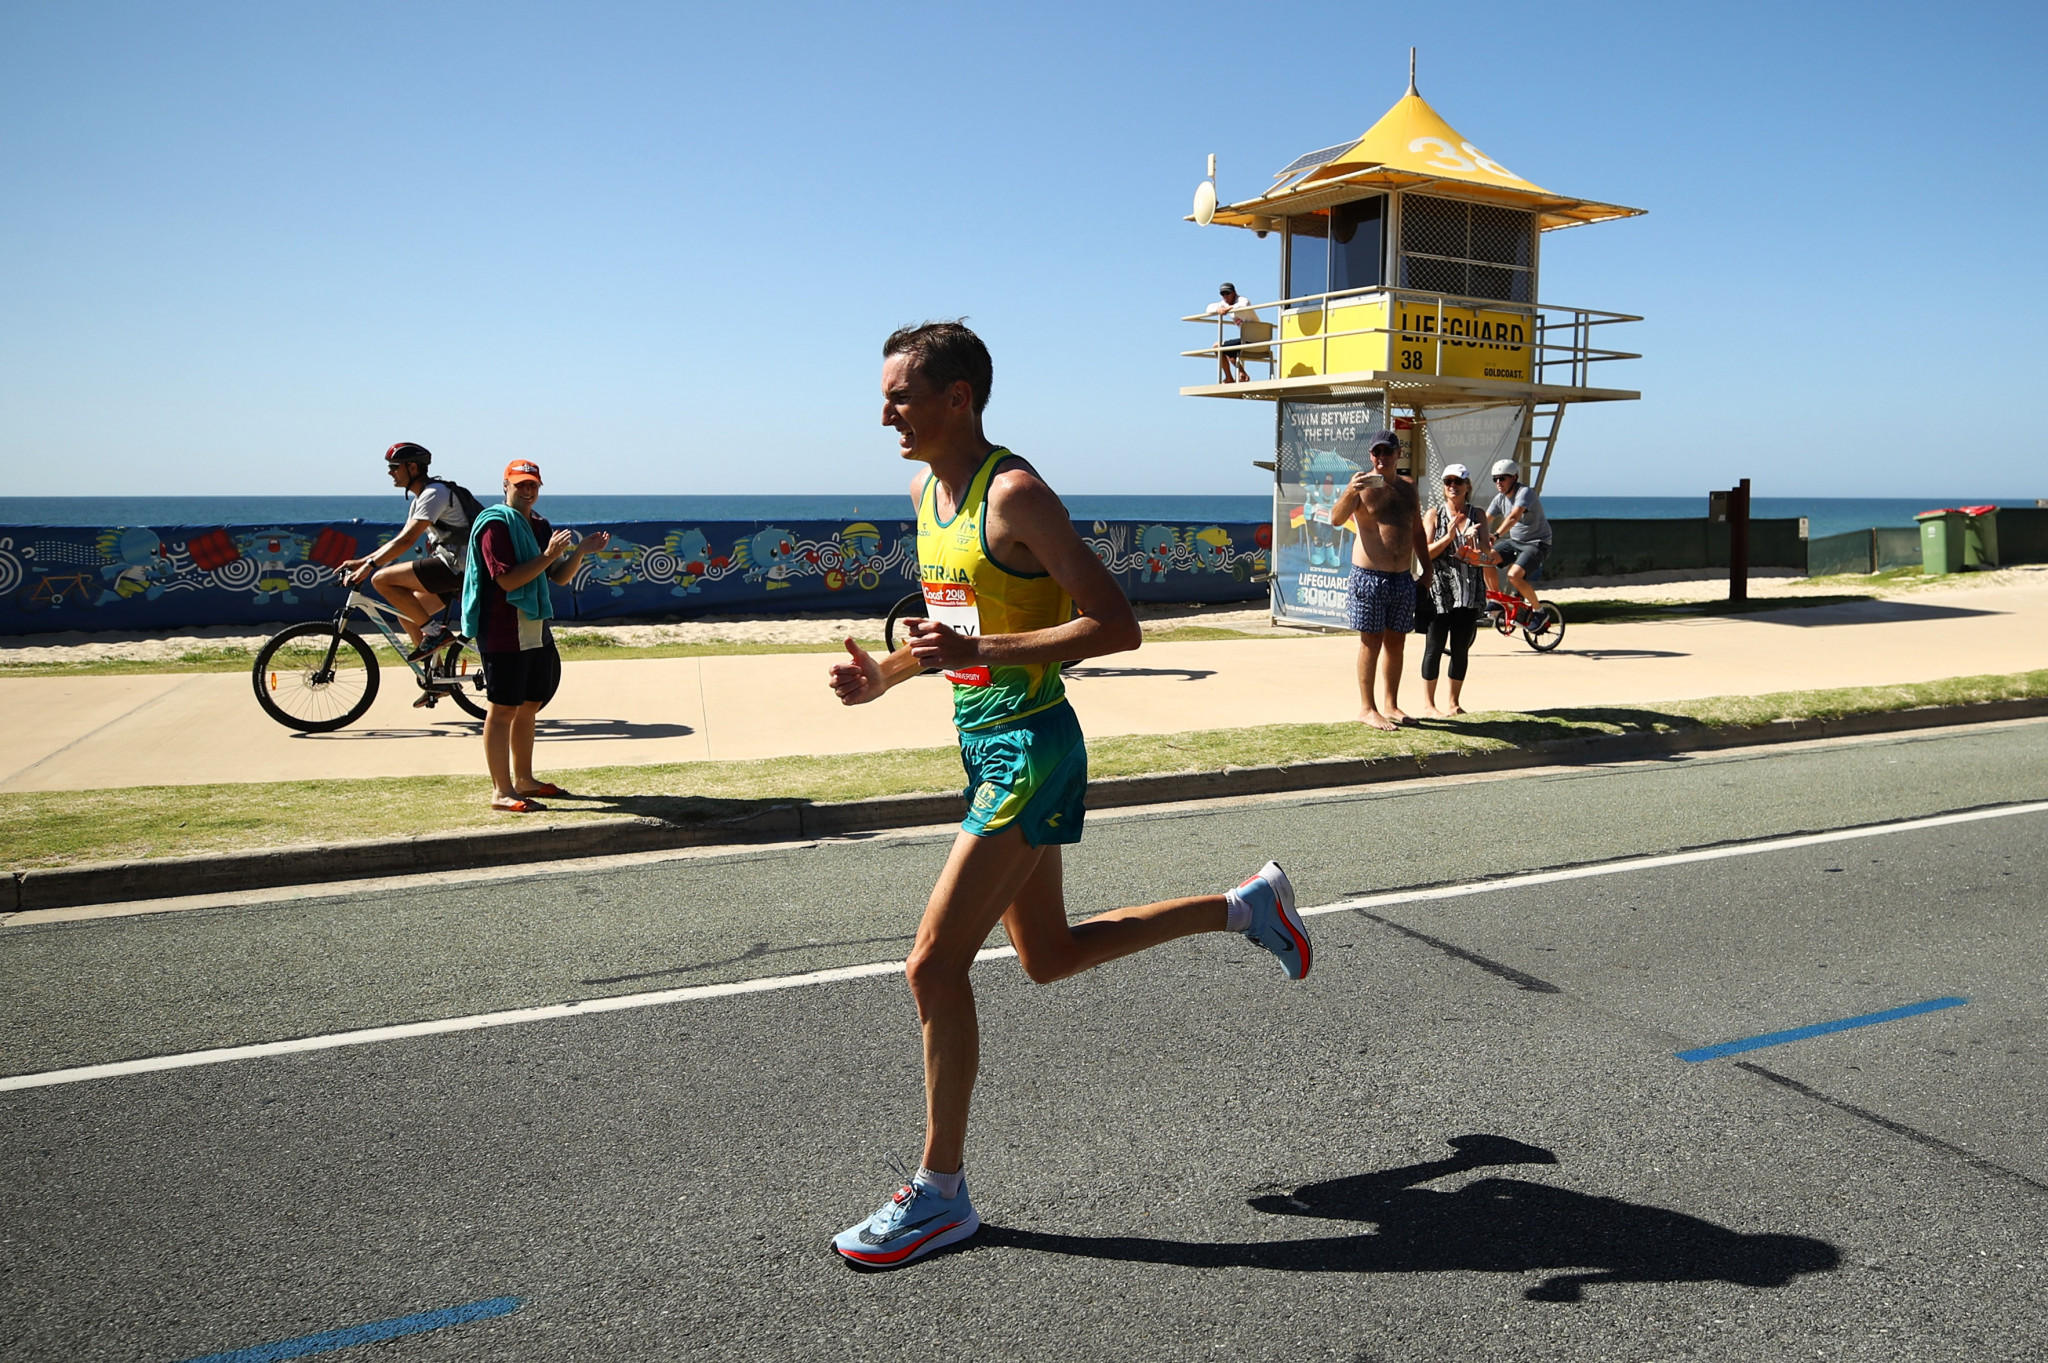 Michael Shelley's success in winning his second consecutive Commonwealth Games gold medal in the marathon at Gold Coast 2018 has captured the imagination of the public 